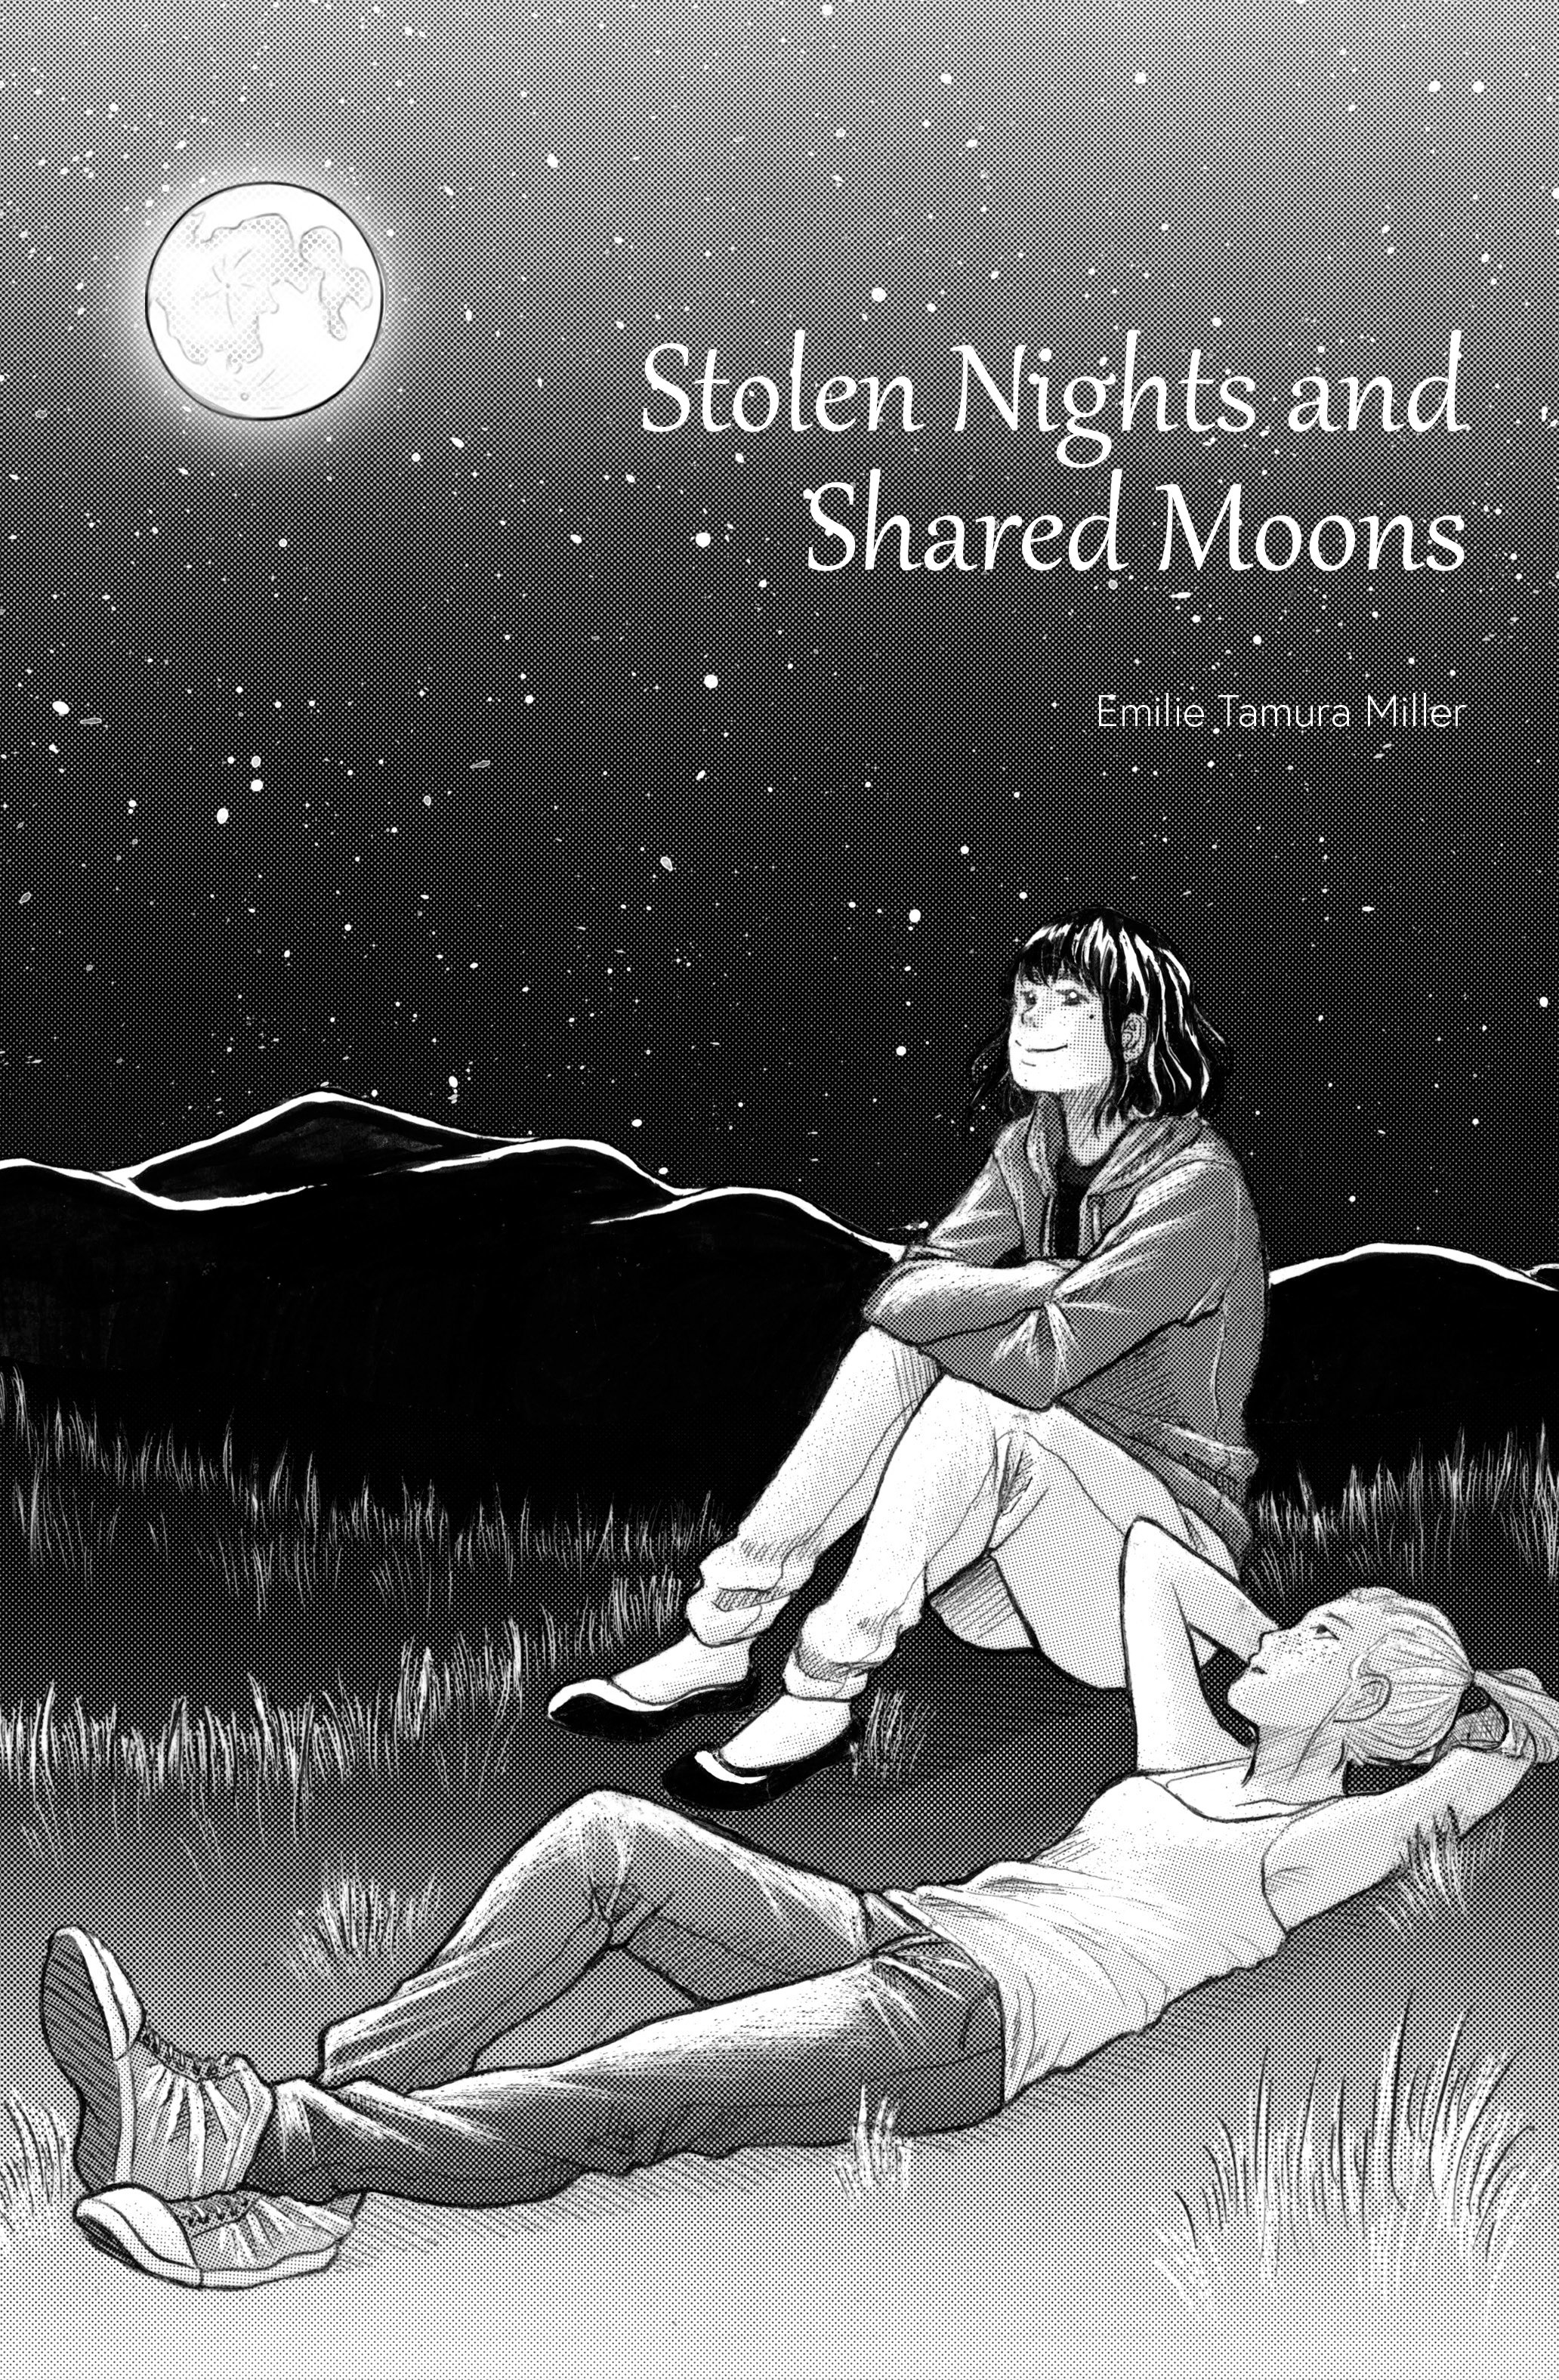 stolen nights and shared moons jpeg cover.jpg